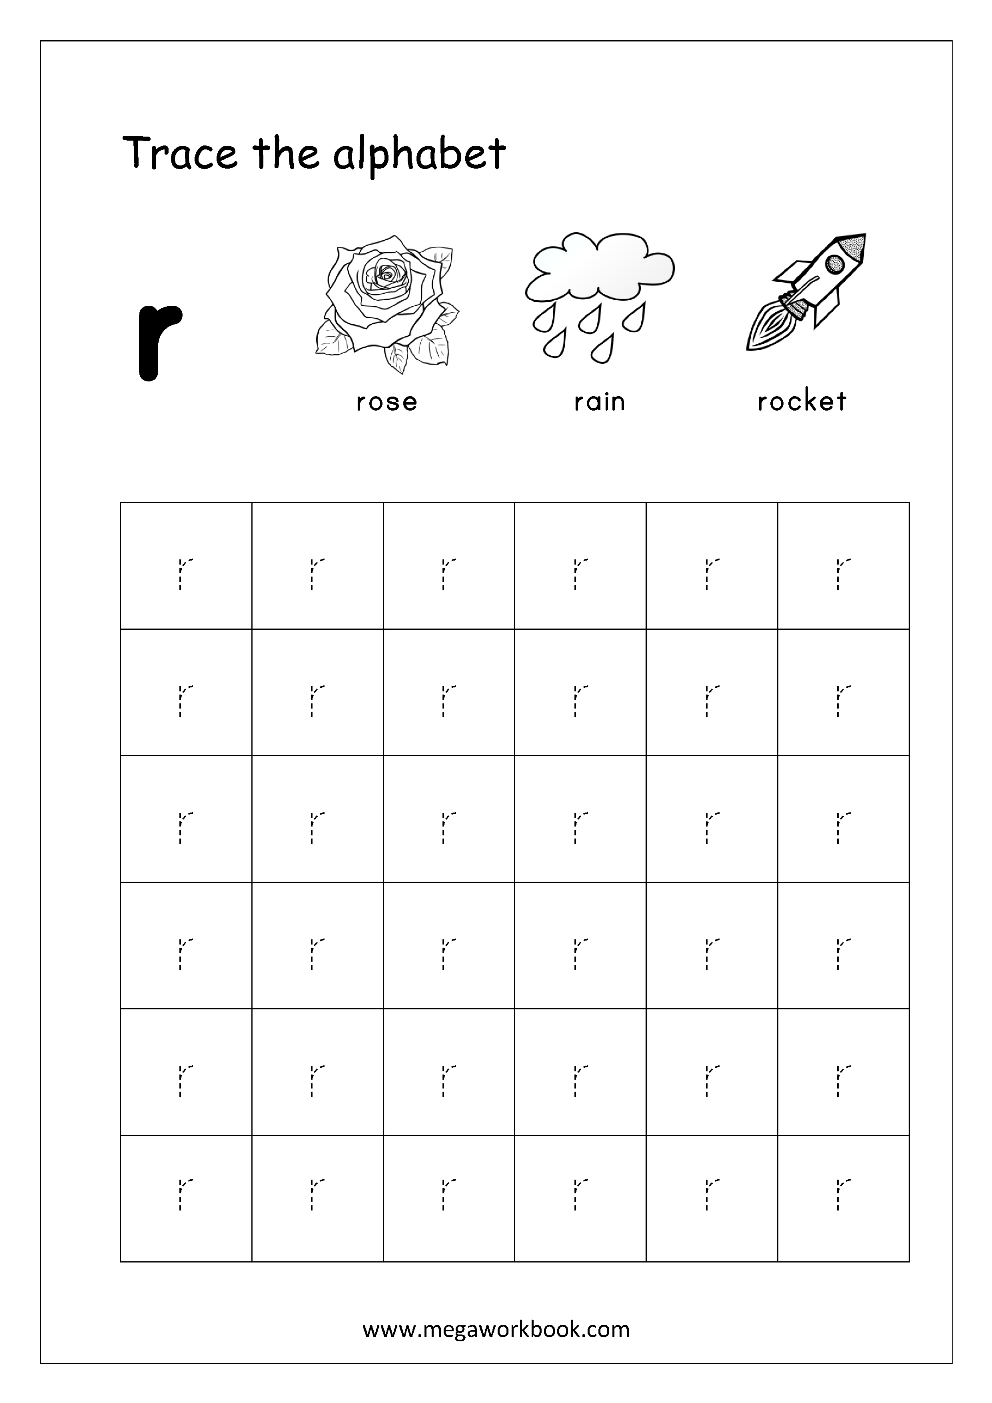 Free English Worksheets - Alphabet Tracing (Small Letters with regard to Alphabet Tracing Worksheets A